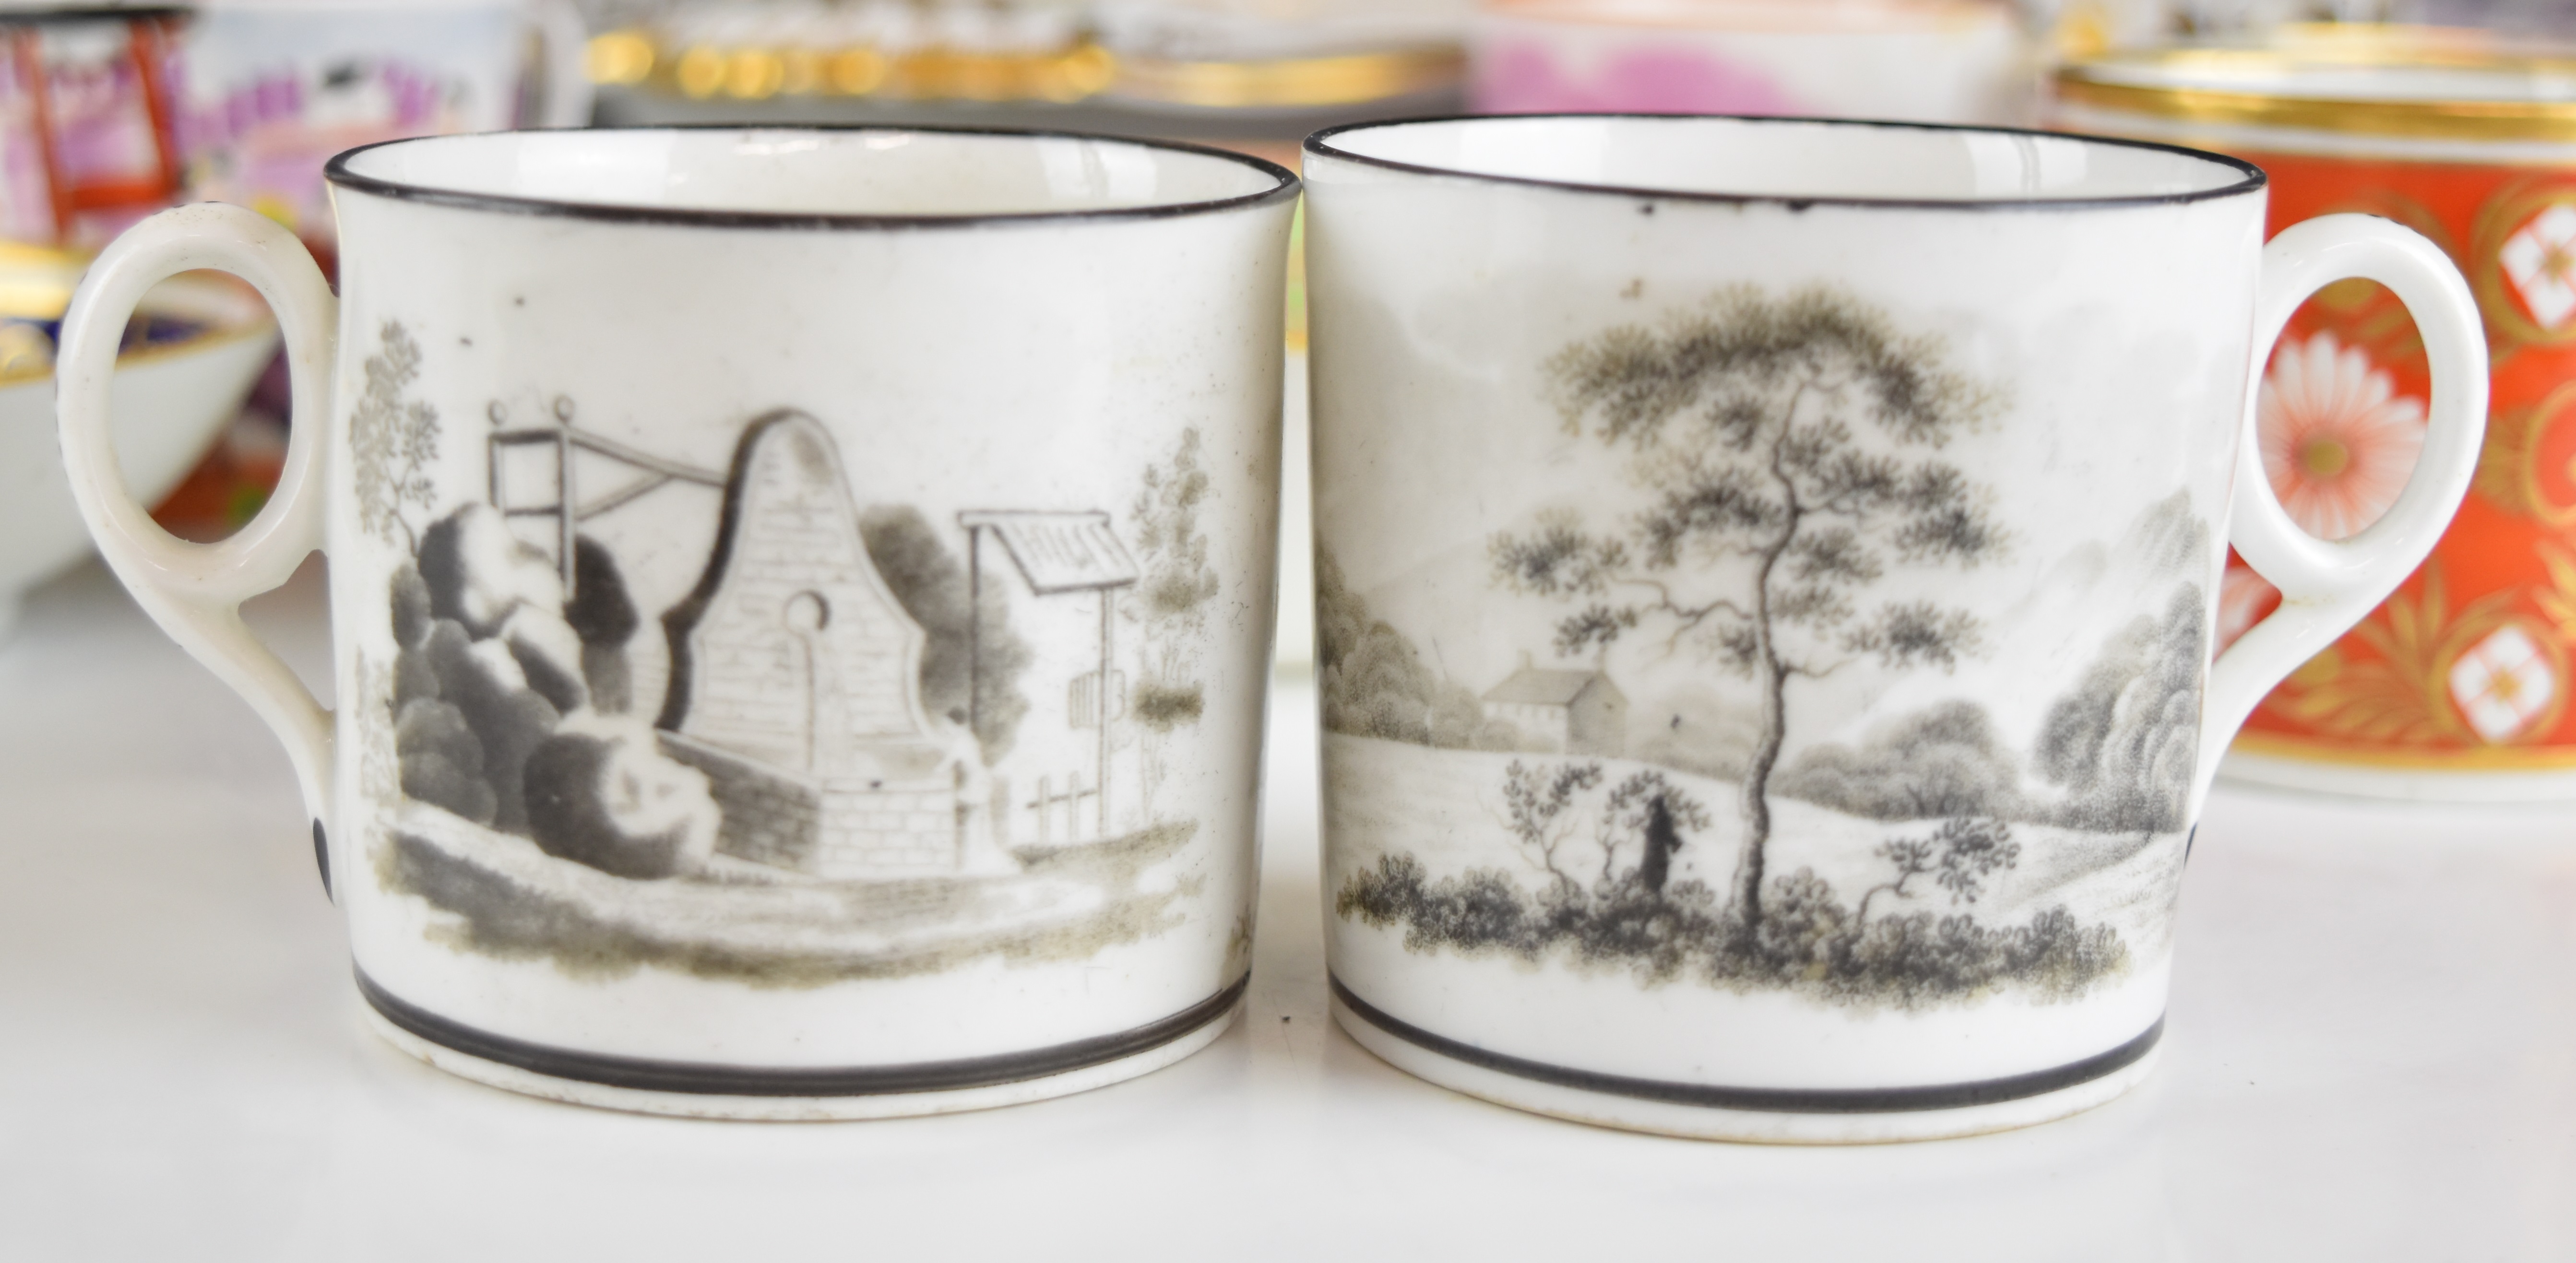 19thC porcelain saucers, dishes, coffee cans and cups including New Hall, Ridgway, bat print - Image 13 of 22